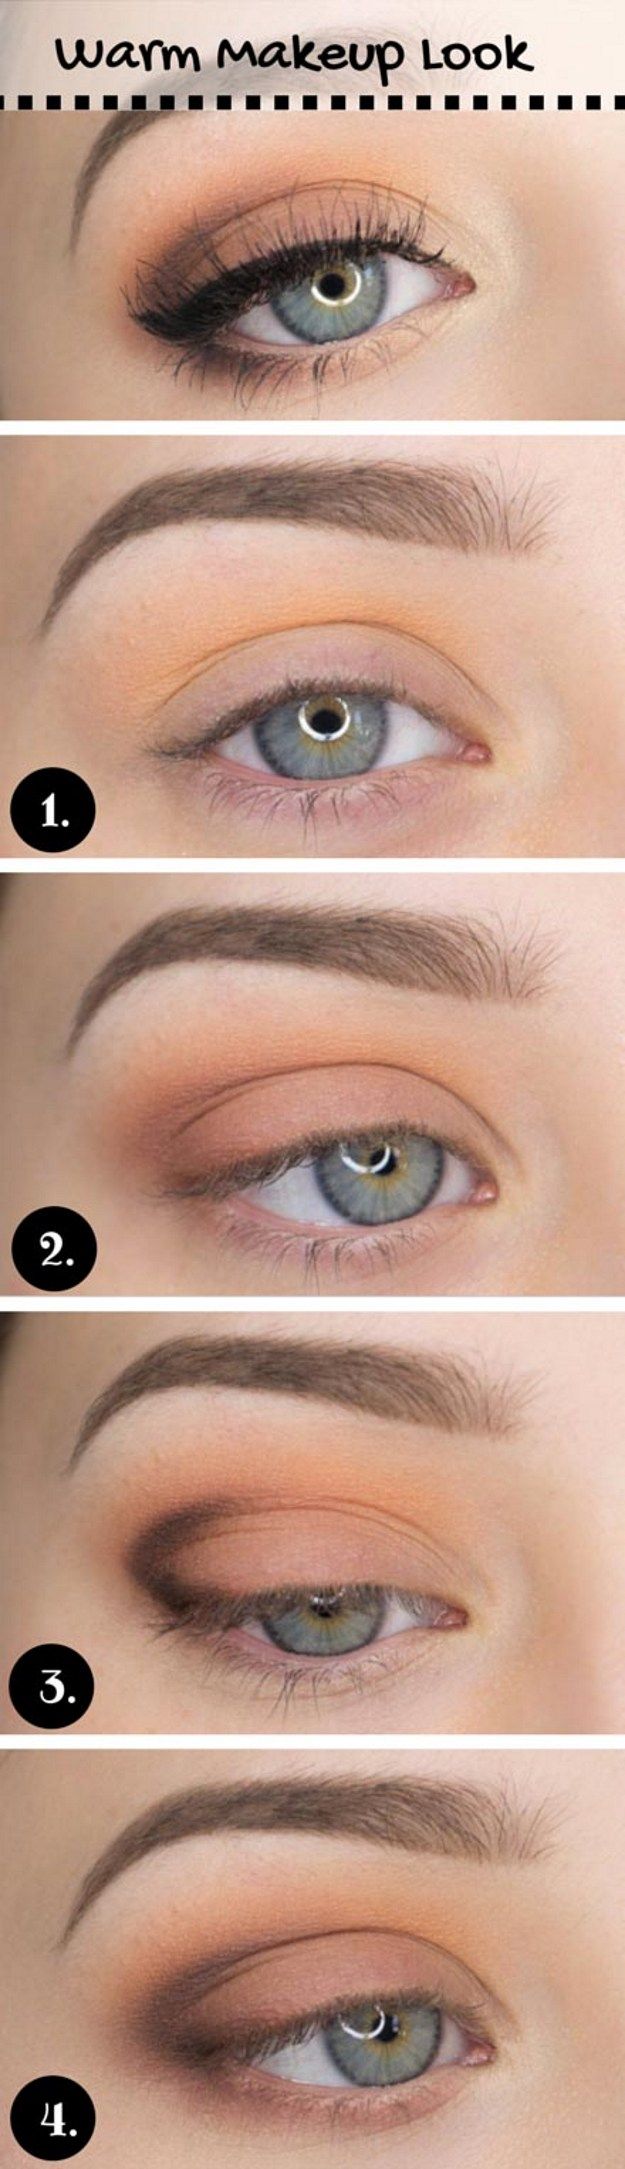 Best Ideas For Makeup Tutorials How To Do Casual Makeup Look